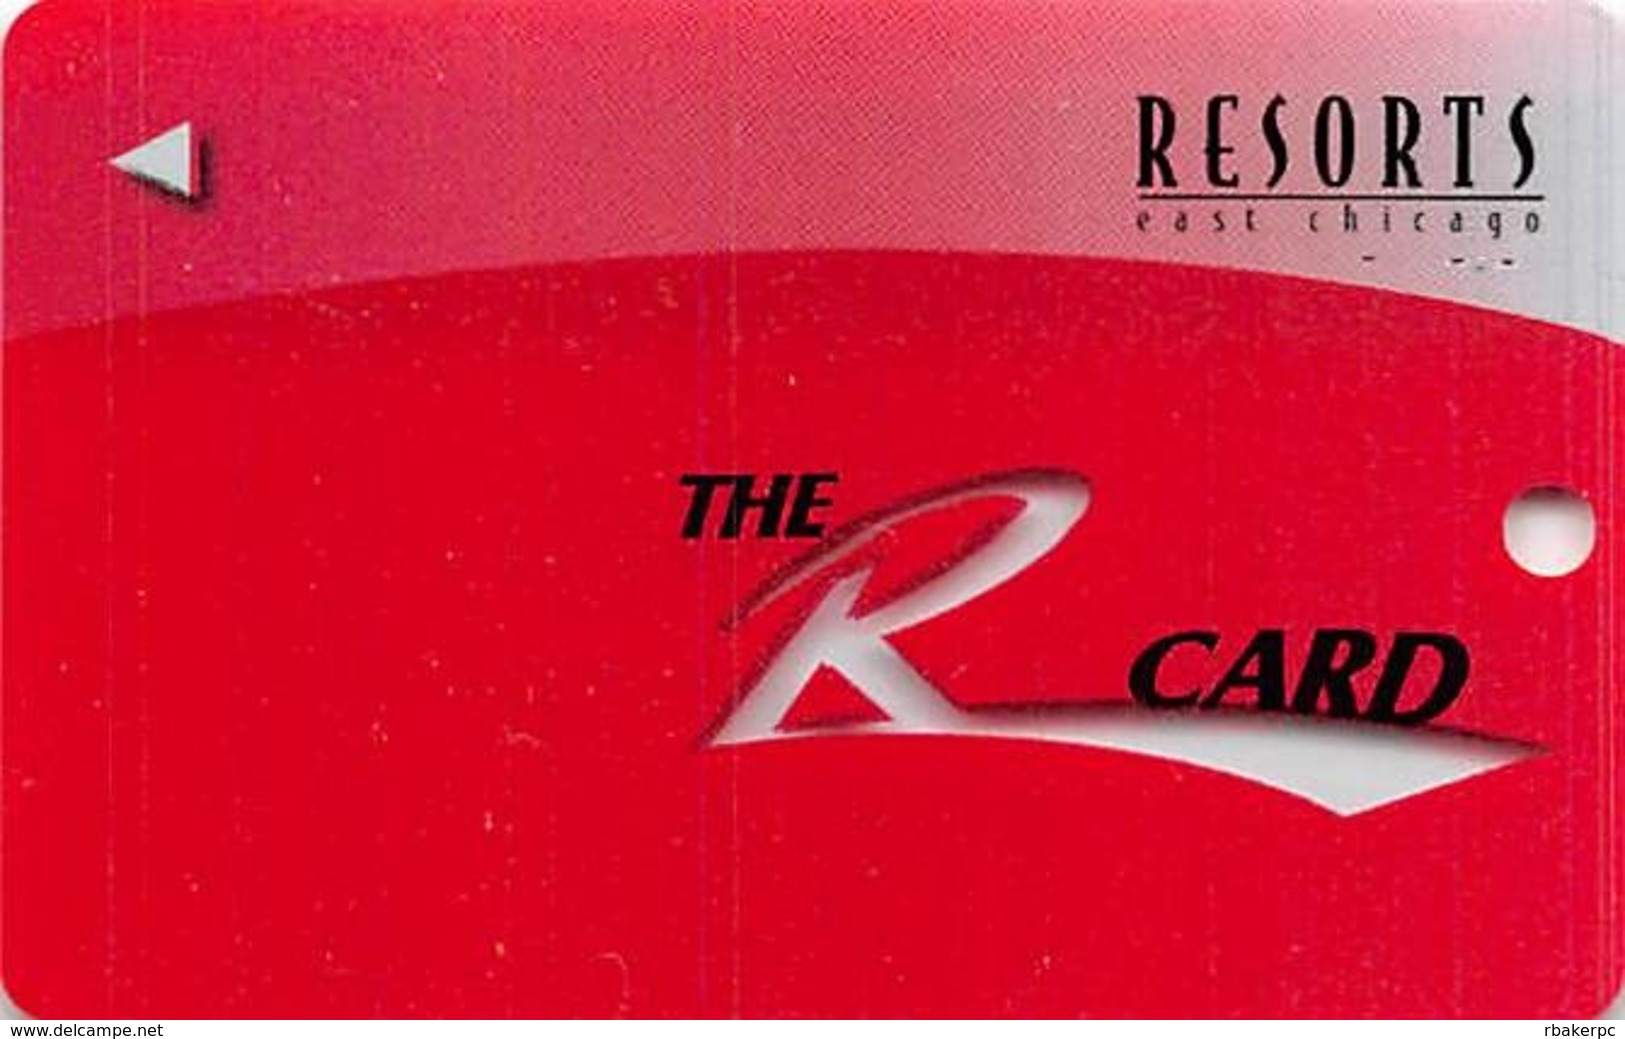 Resorts Casino - East Chicago, IN USA - BLANK Slot Card - Large Clear See-Thru 'R' - Shadow On Insert Arrow - Casino Cards